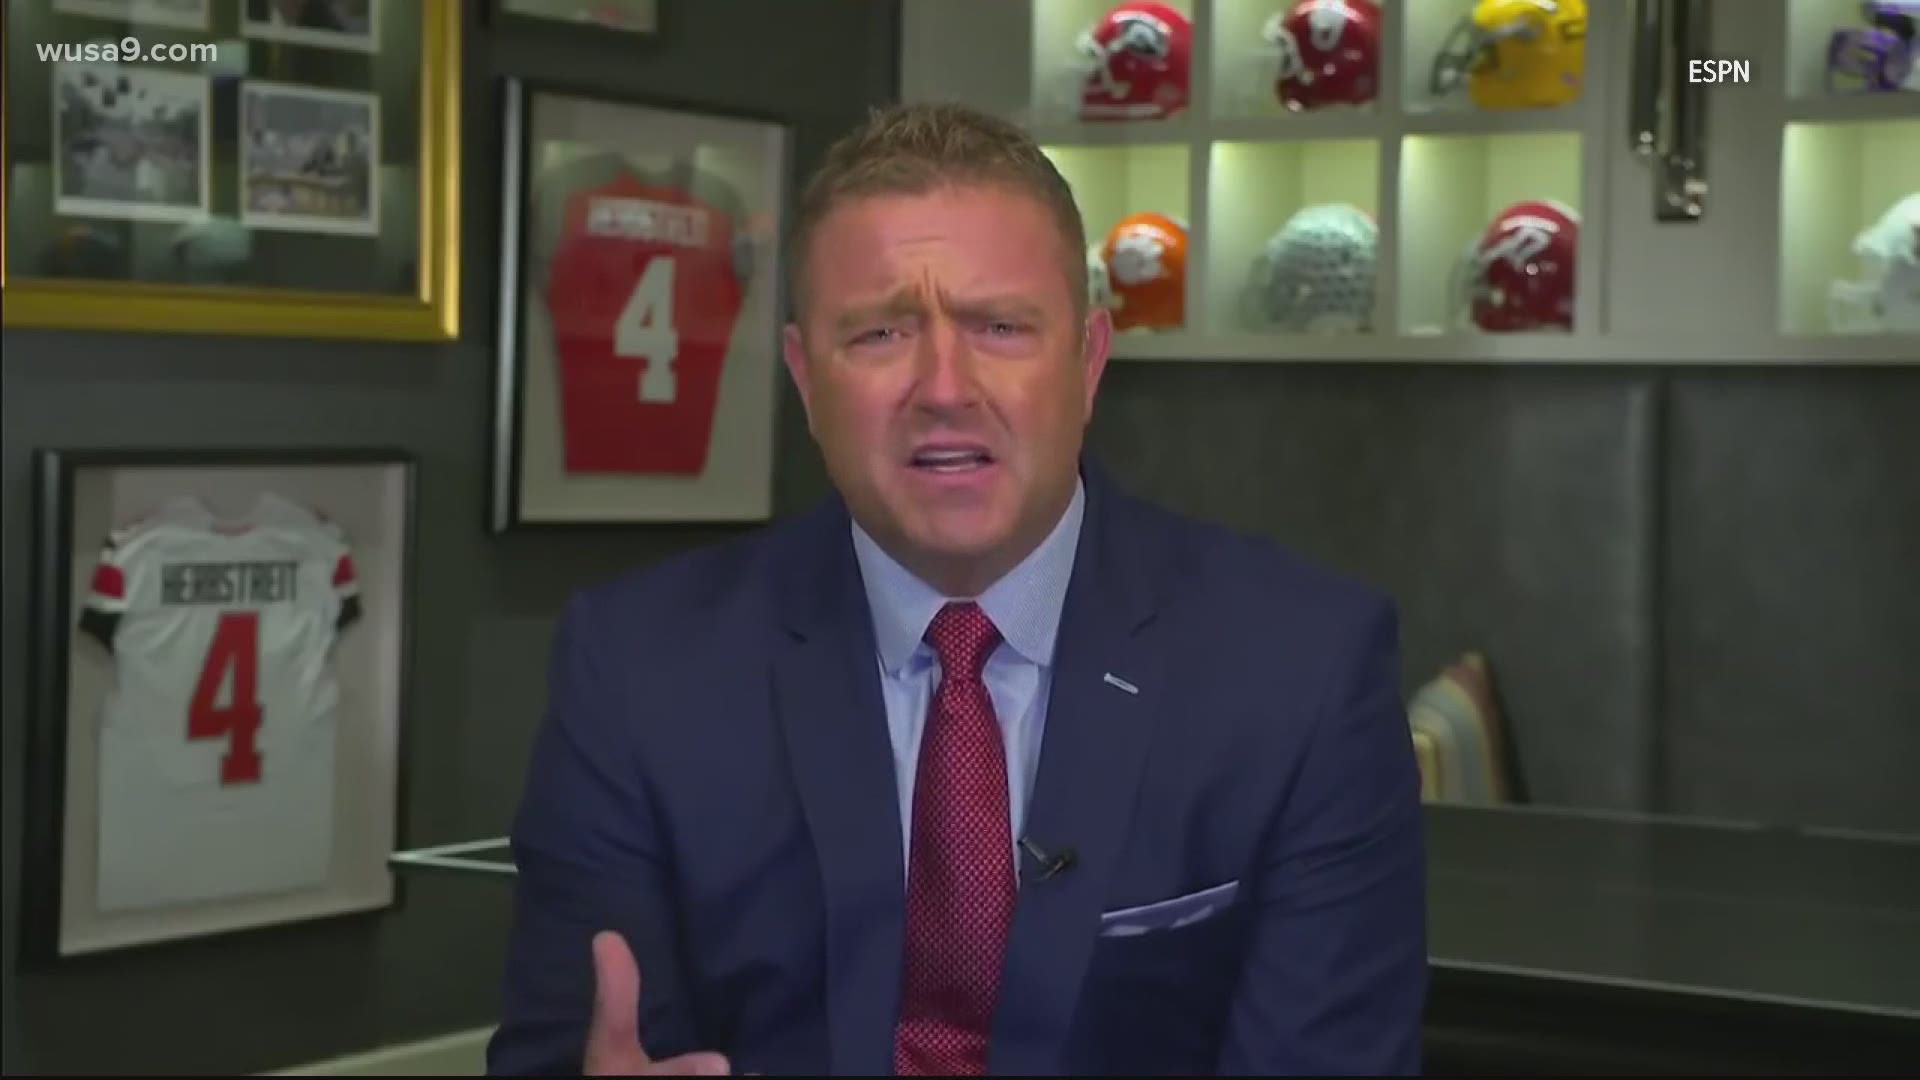 If you want to see what allyship looks like, look up Kirk Herbstreit's impassioned call for social justice.